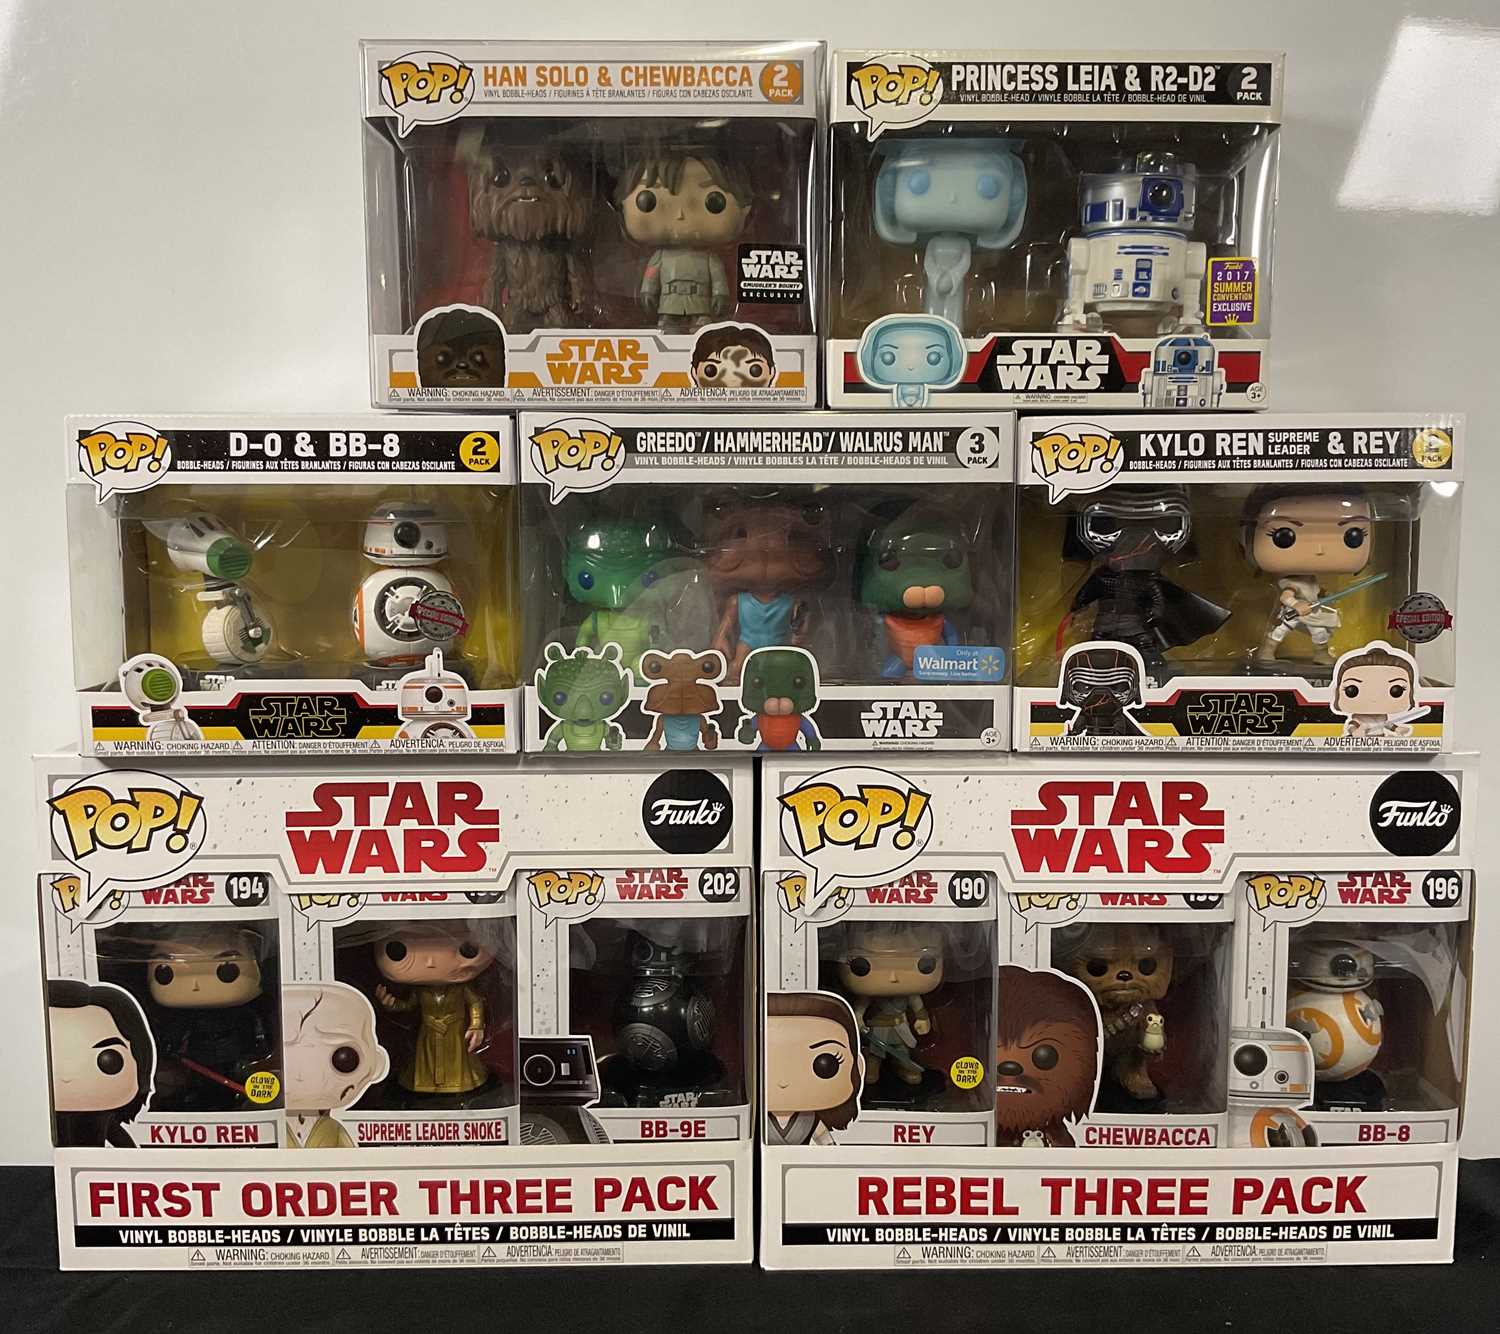 STAR WARS - A group of Star Wars Funko Pop multi packs comprising of Princess Leia & R2-D2, 2